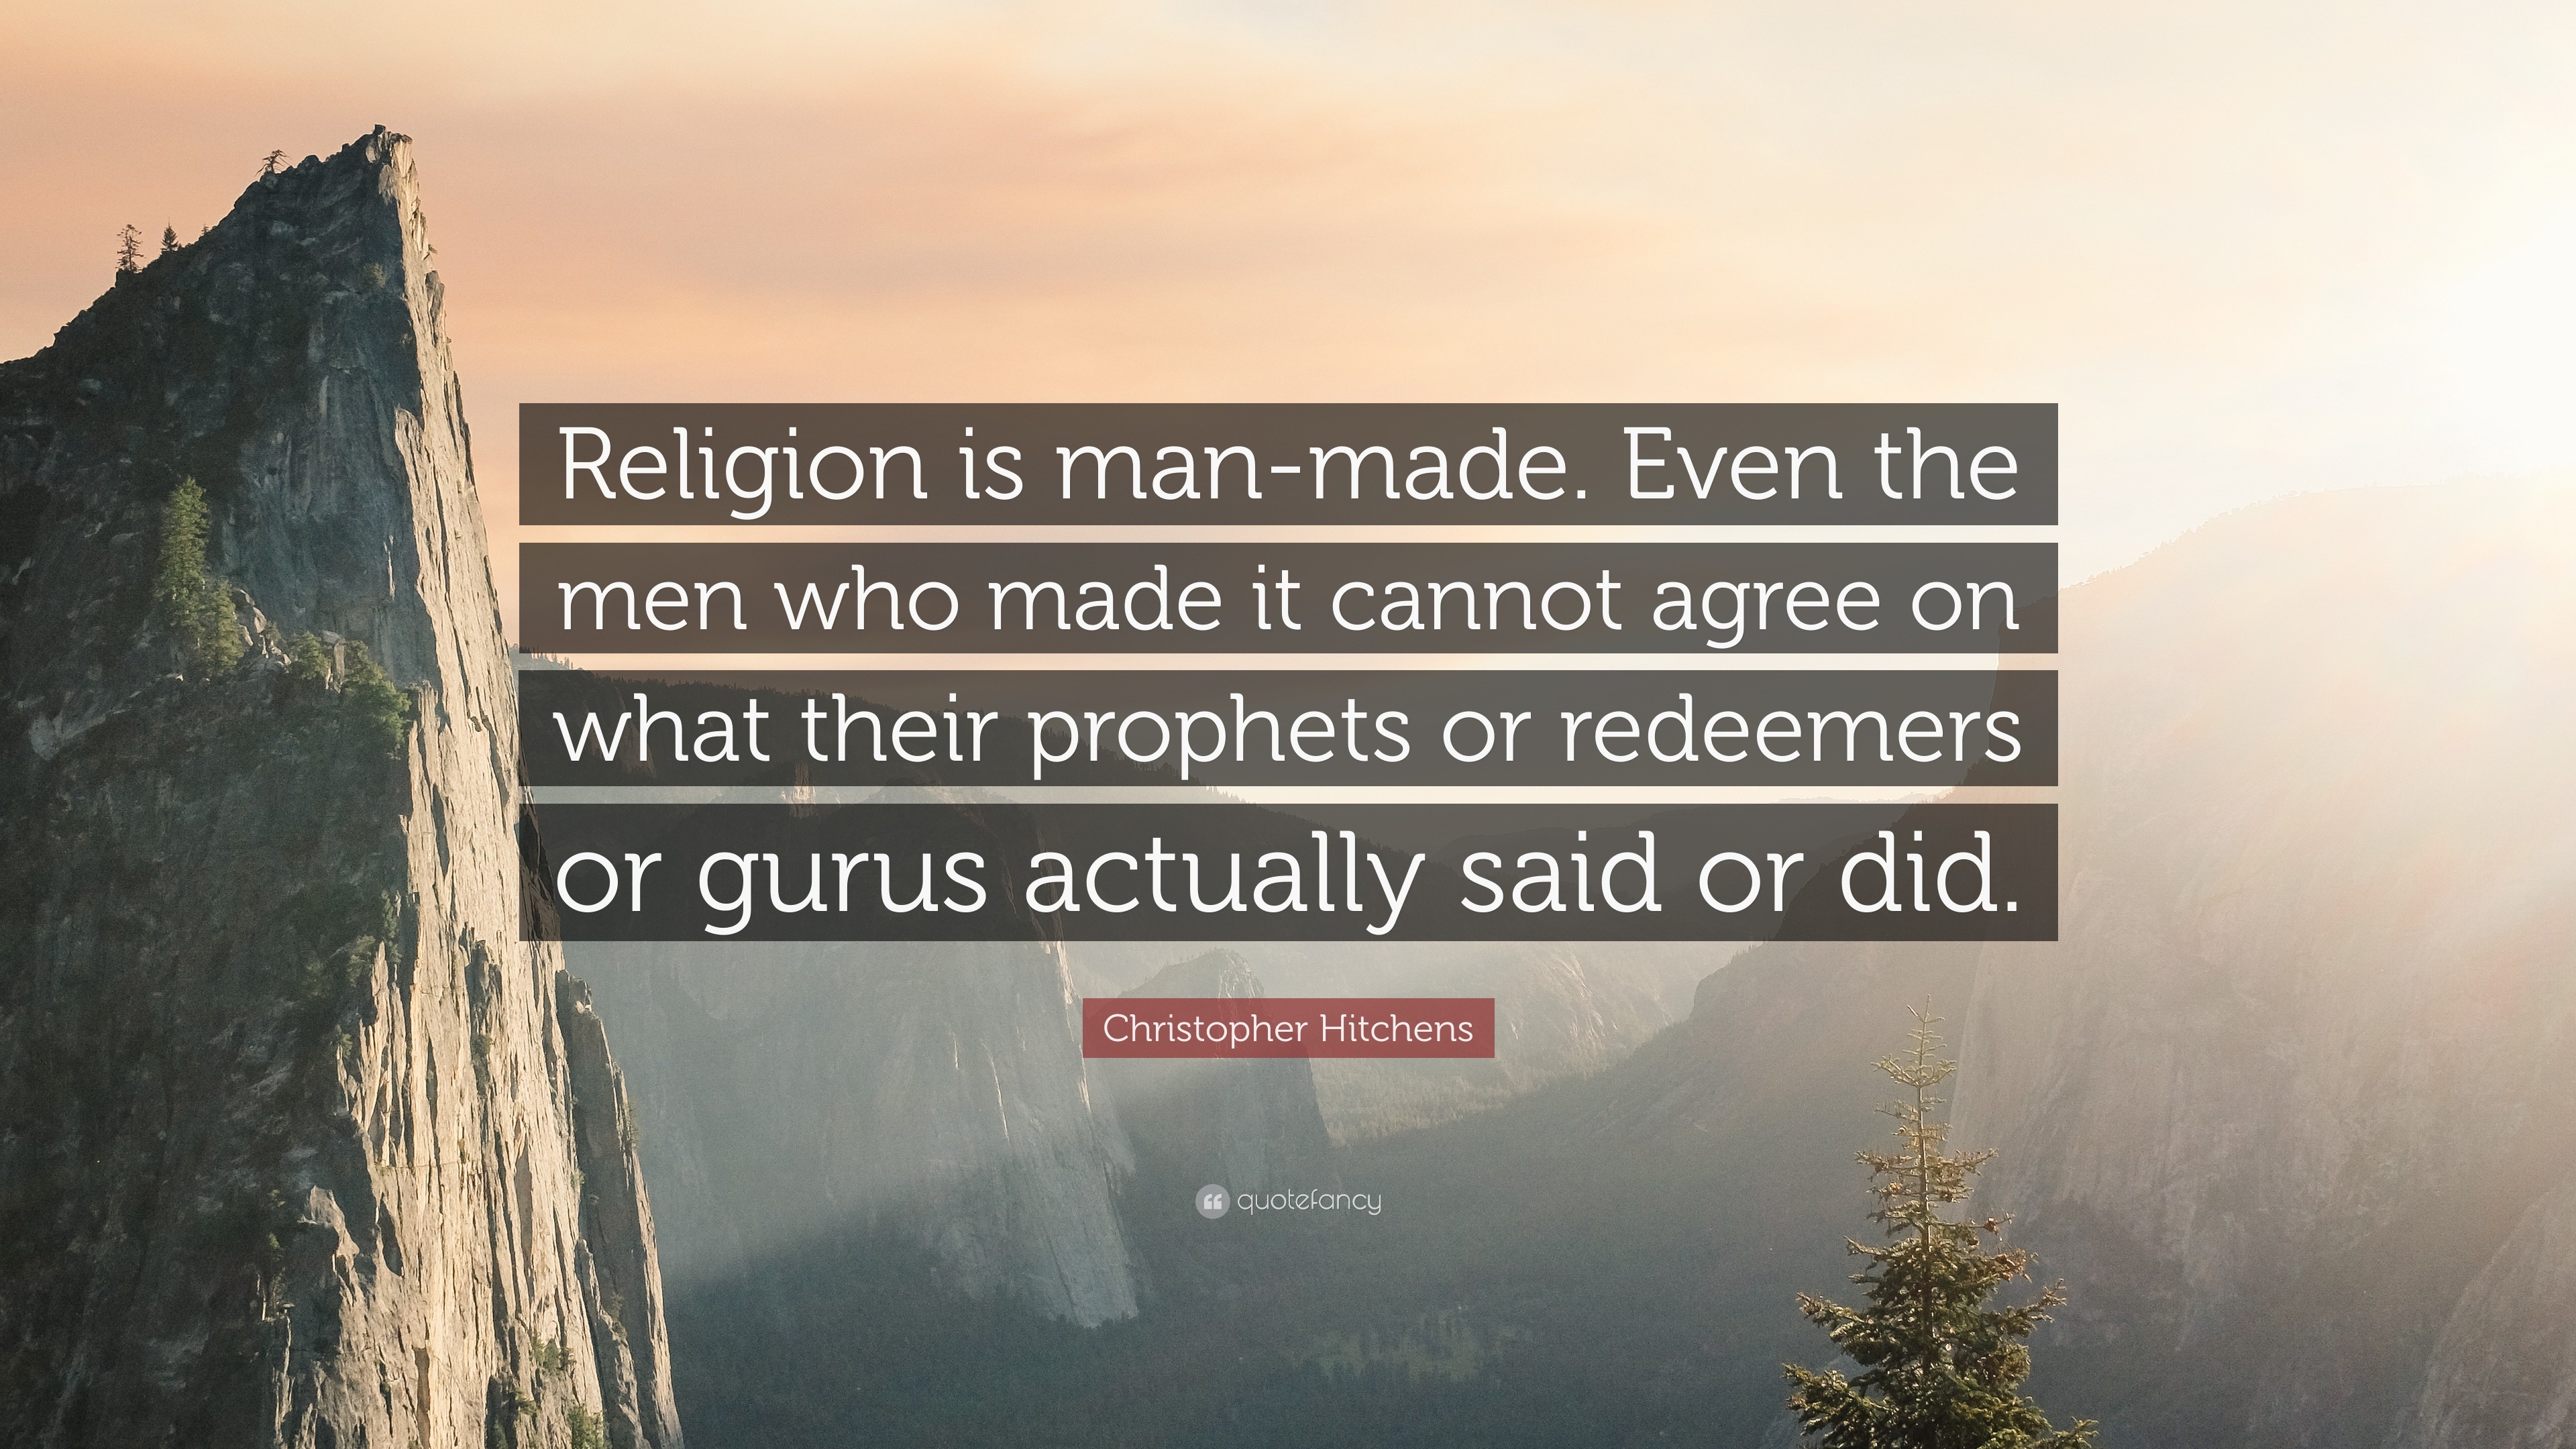 Christopher Hitchens Quote: “Religion is man-made. Even the men who